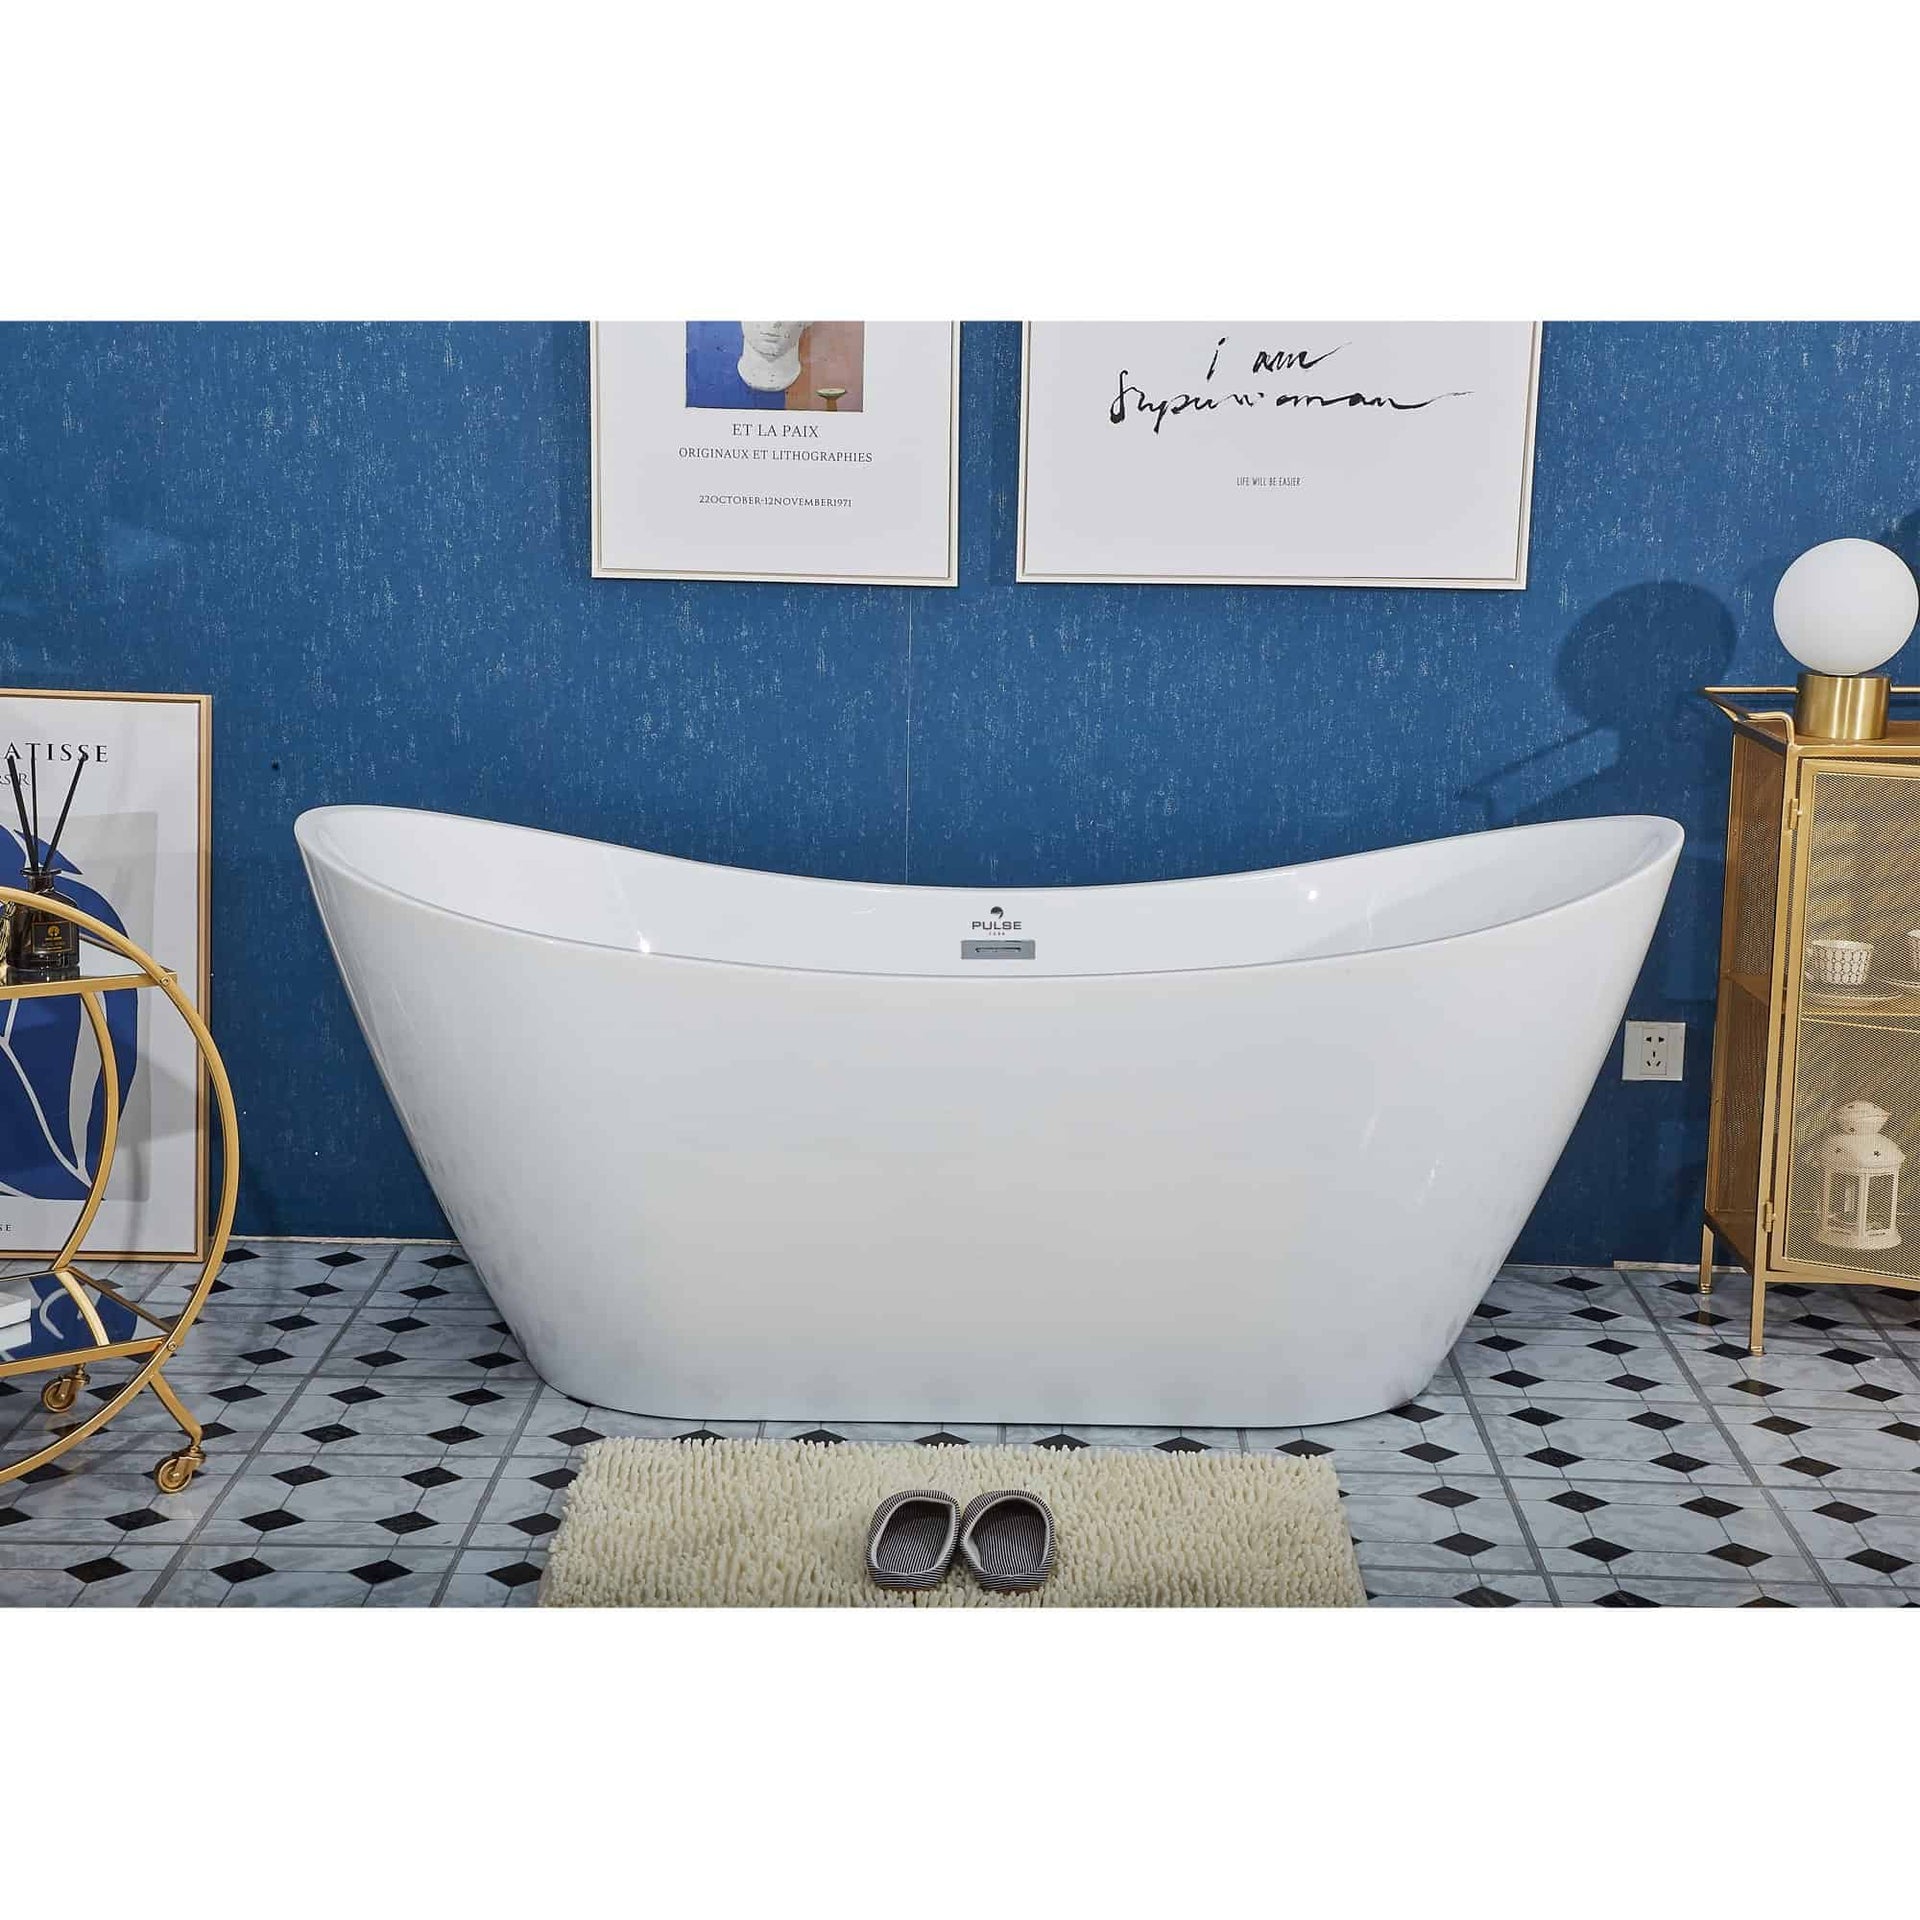 Pulse ShowerSpas 69" Acrylic Freestanding Soaking Bathtub with Curved Design - Glossy White - Senior.com Stand alone Tubs